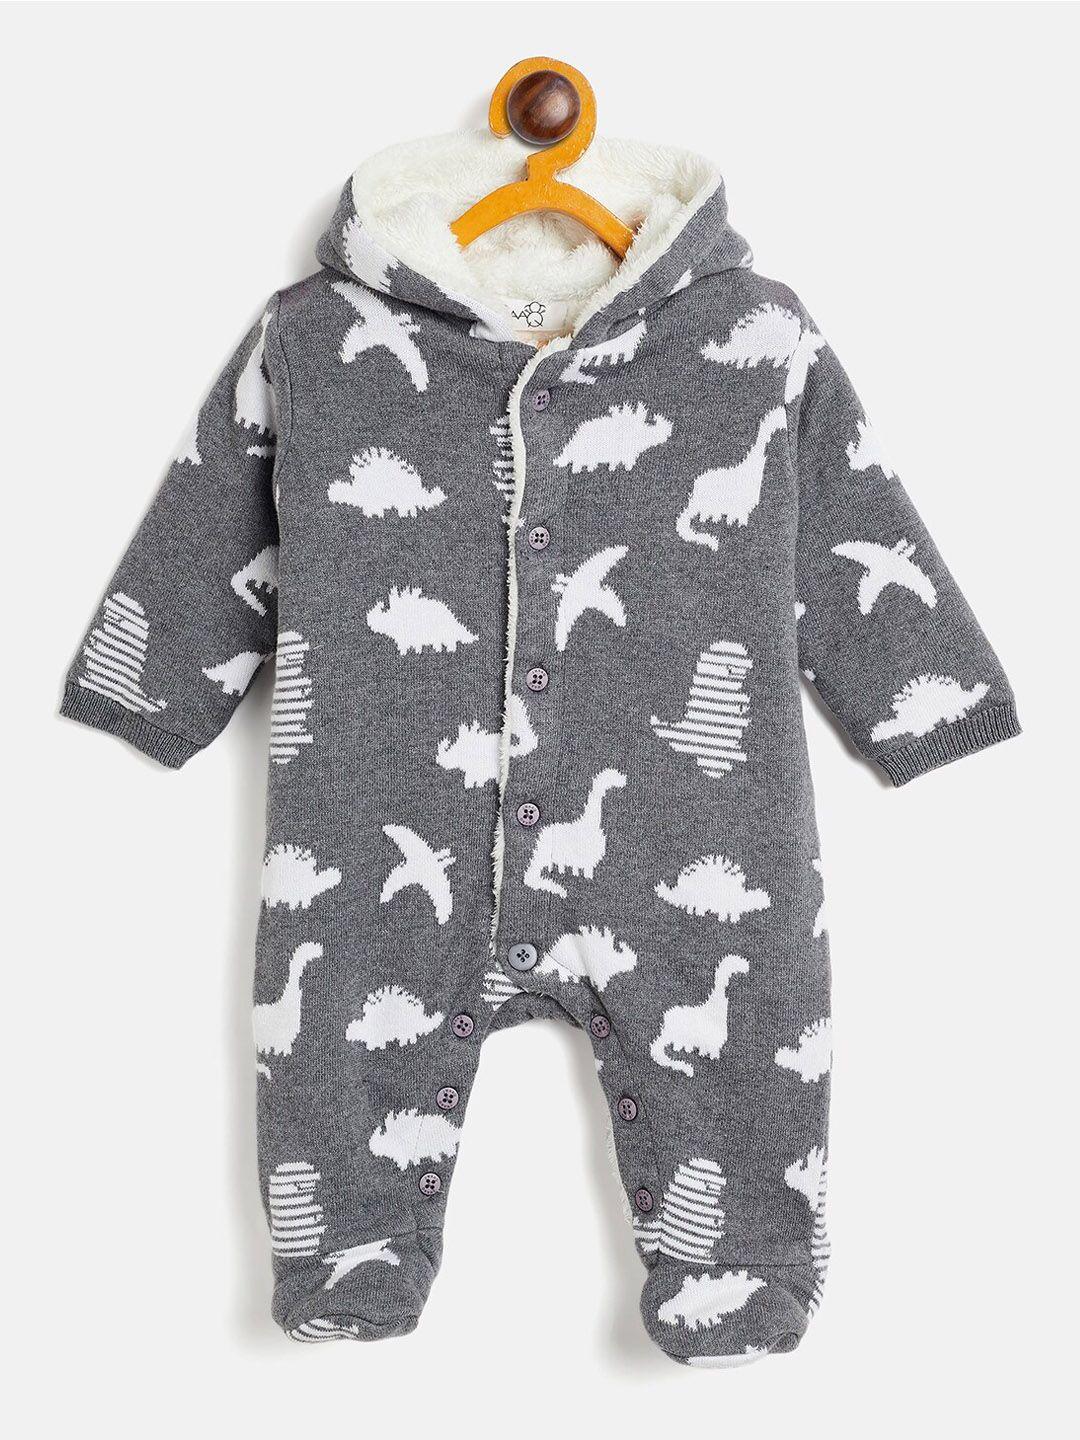 jwaaq infants printed pure cotton rompers